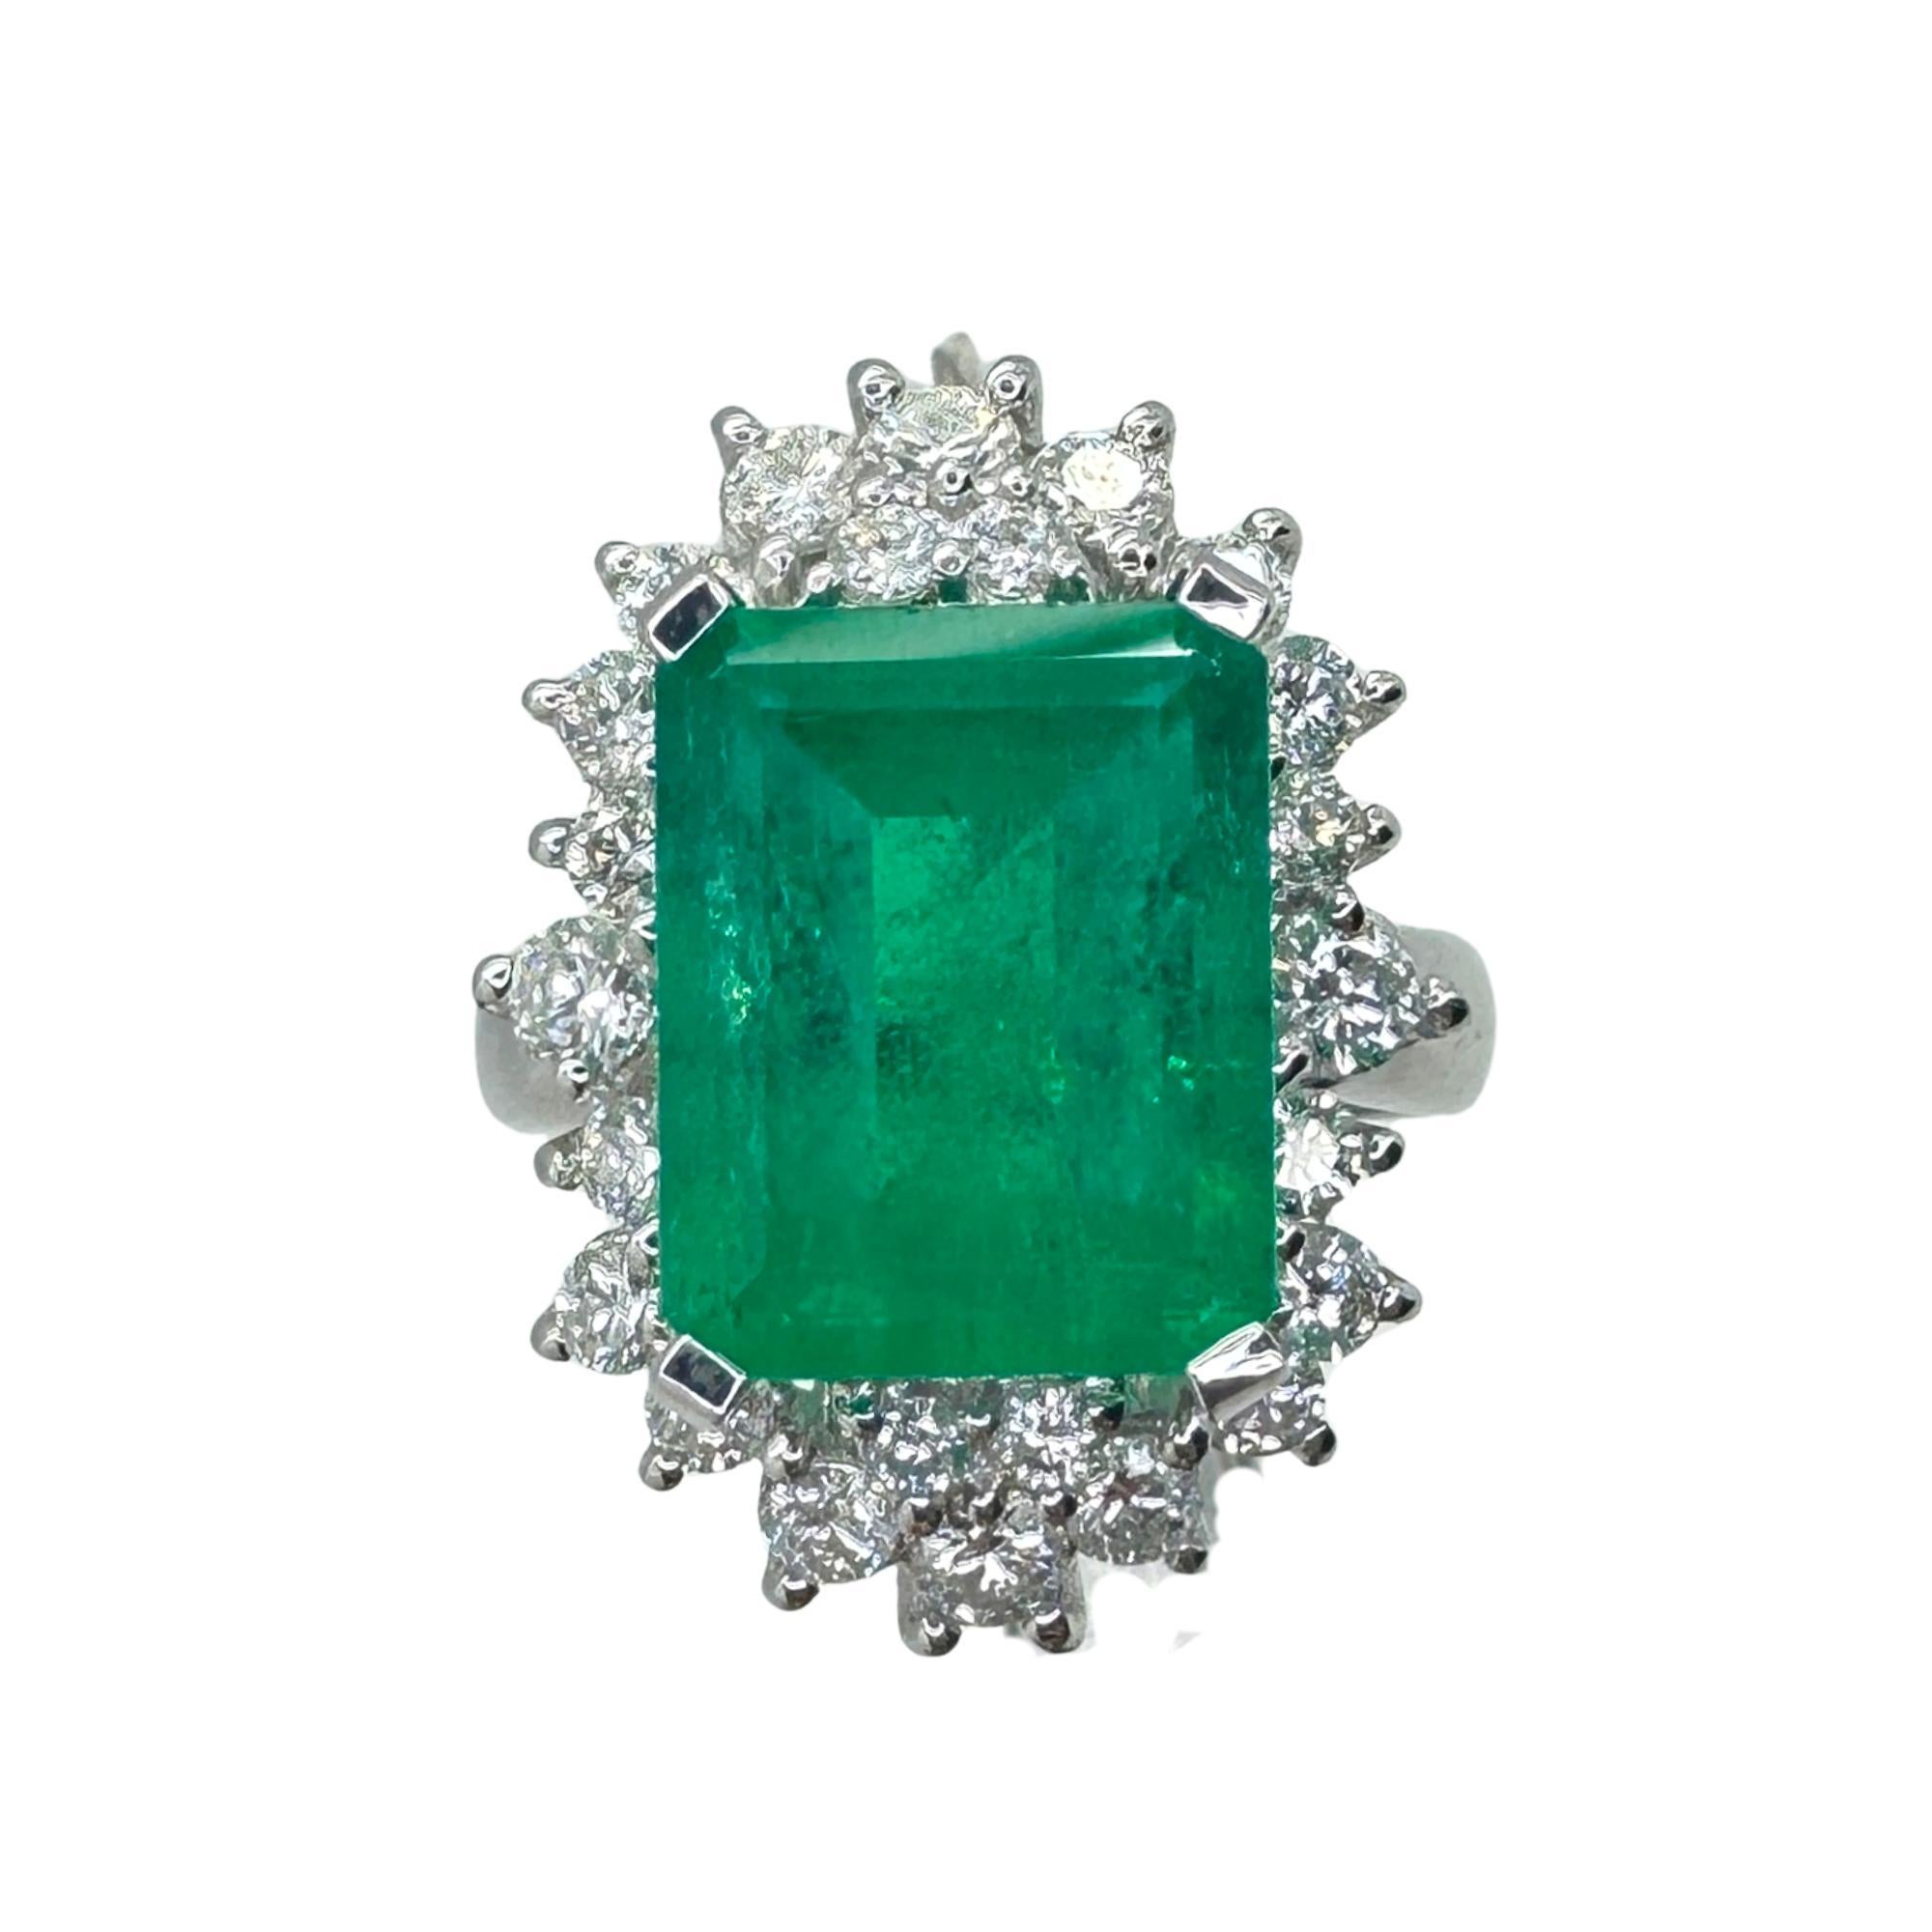 Indulge in pure luxury with our 18k Diamond and Emerald Ring. Crafted from gleaming 18k white gold and adorned with sparkling 1.04 carat diamonds and a breathtaking 5.18 carat emerald in the center, this ring exudes sophistication and elegance. With